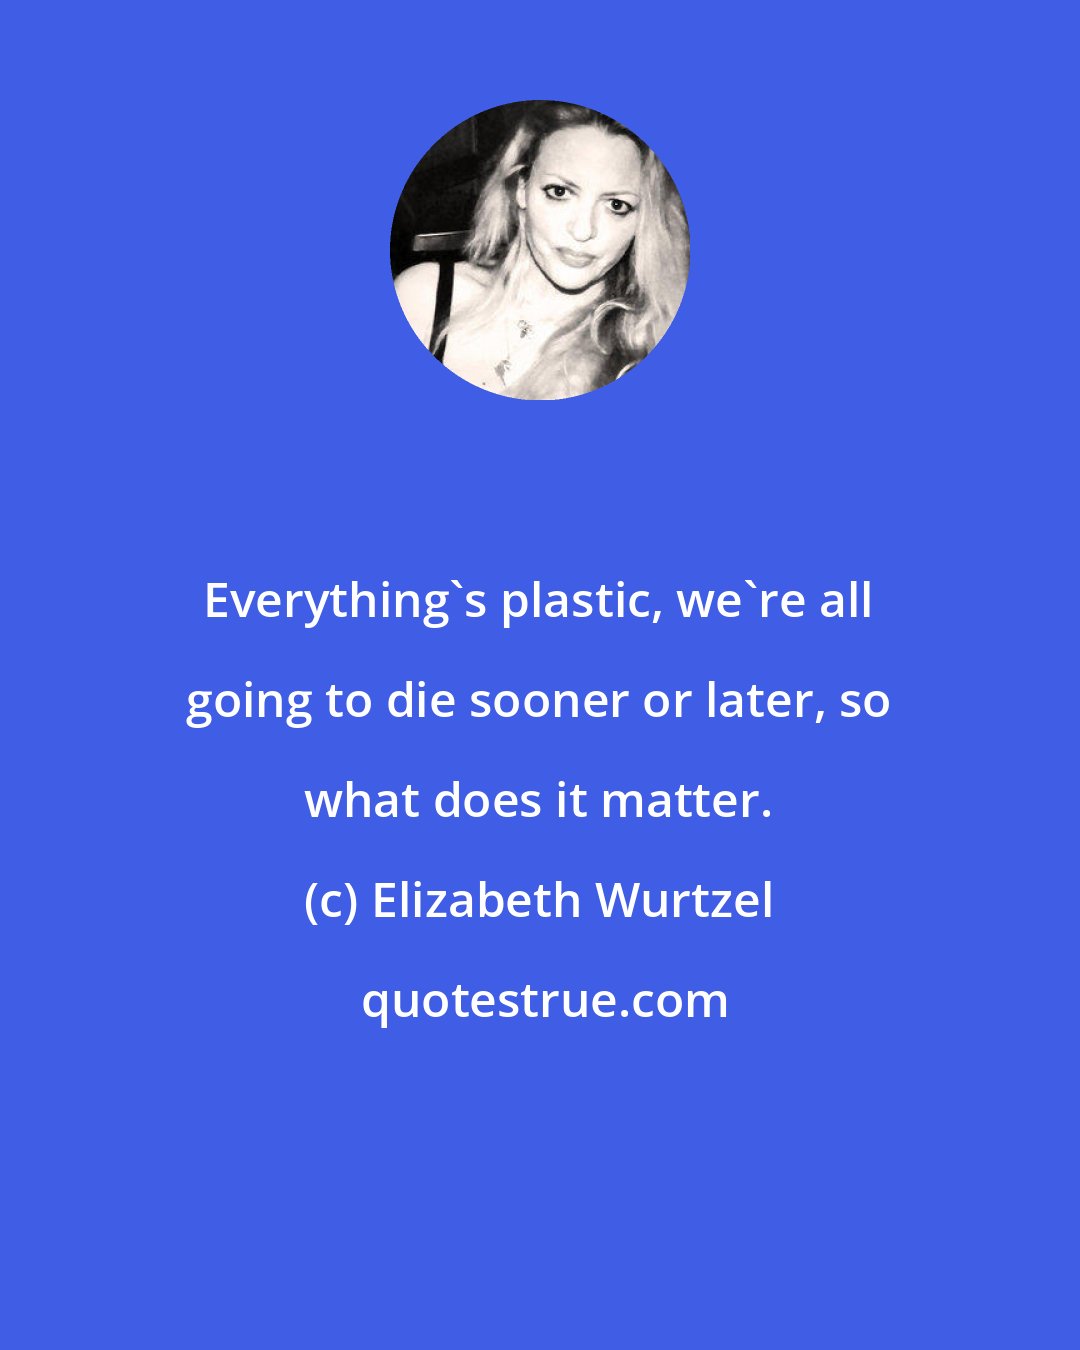 Elizabeth Wurtzel: Everything's plastic, we're all going to die sooner or later, so what does it matter.